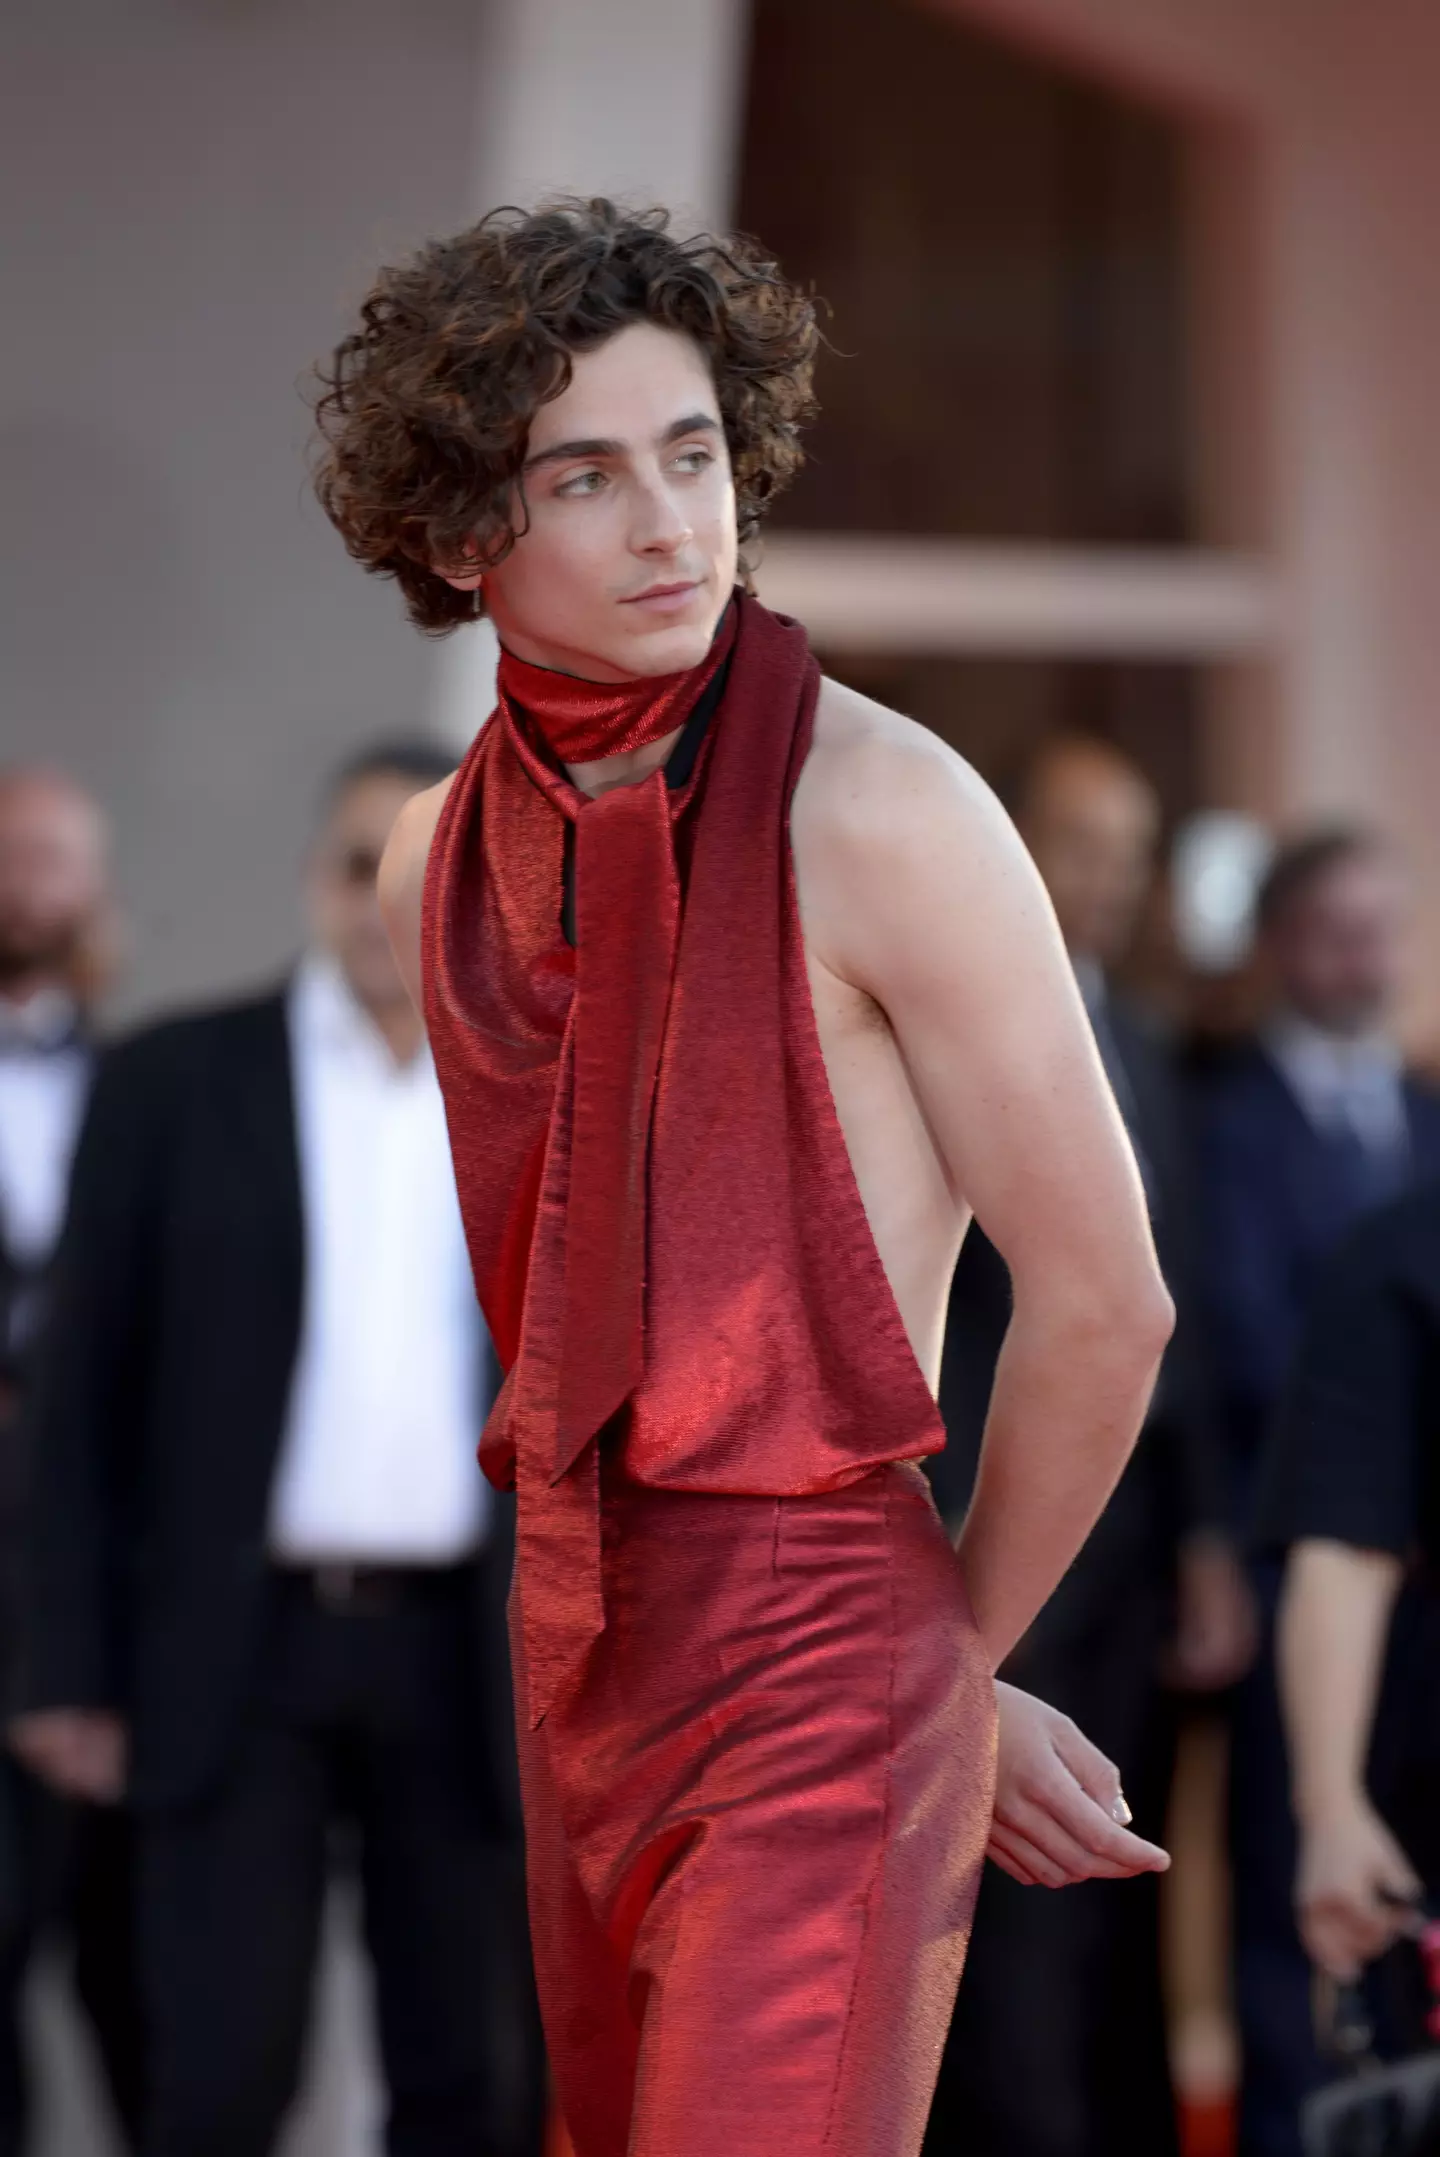 Chalamet on the red carpet at Venice Film Festival.